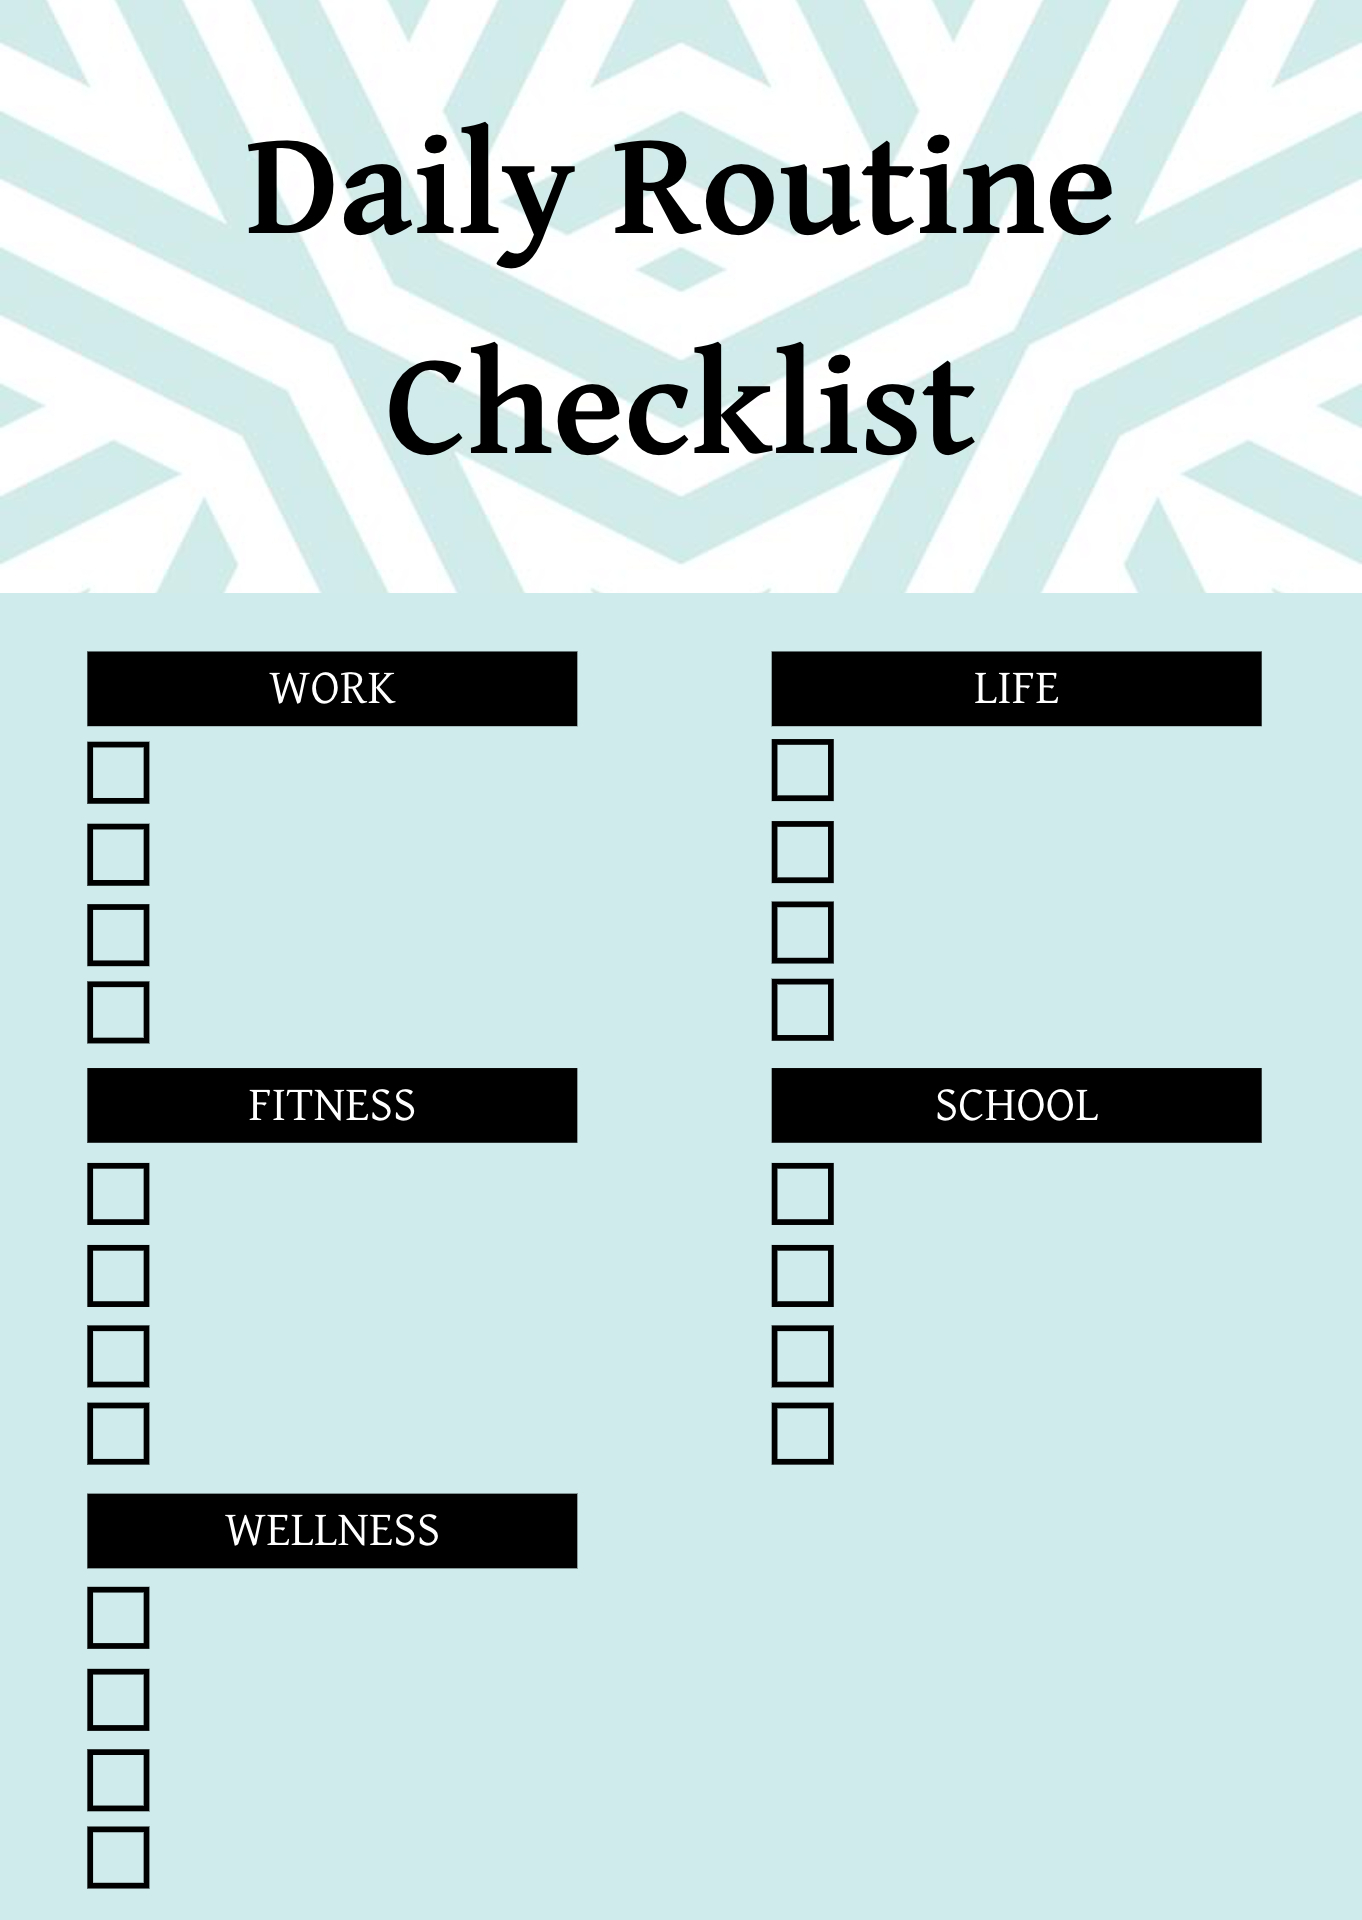 Daily Routine Checklist Template Throughout Daily Routine Checklist Template Inside Daily Routine Checklist Template